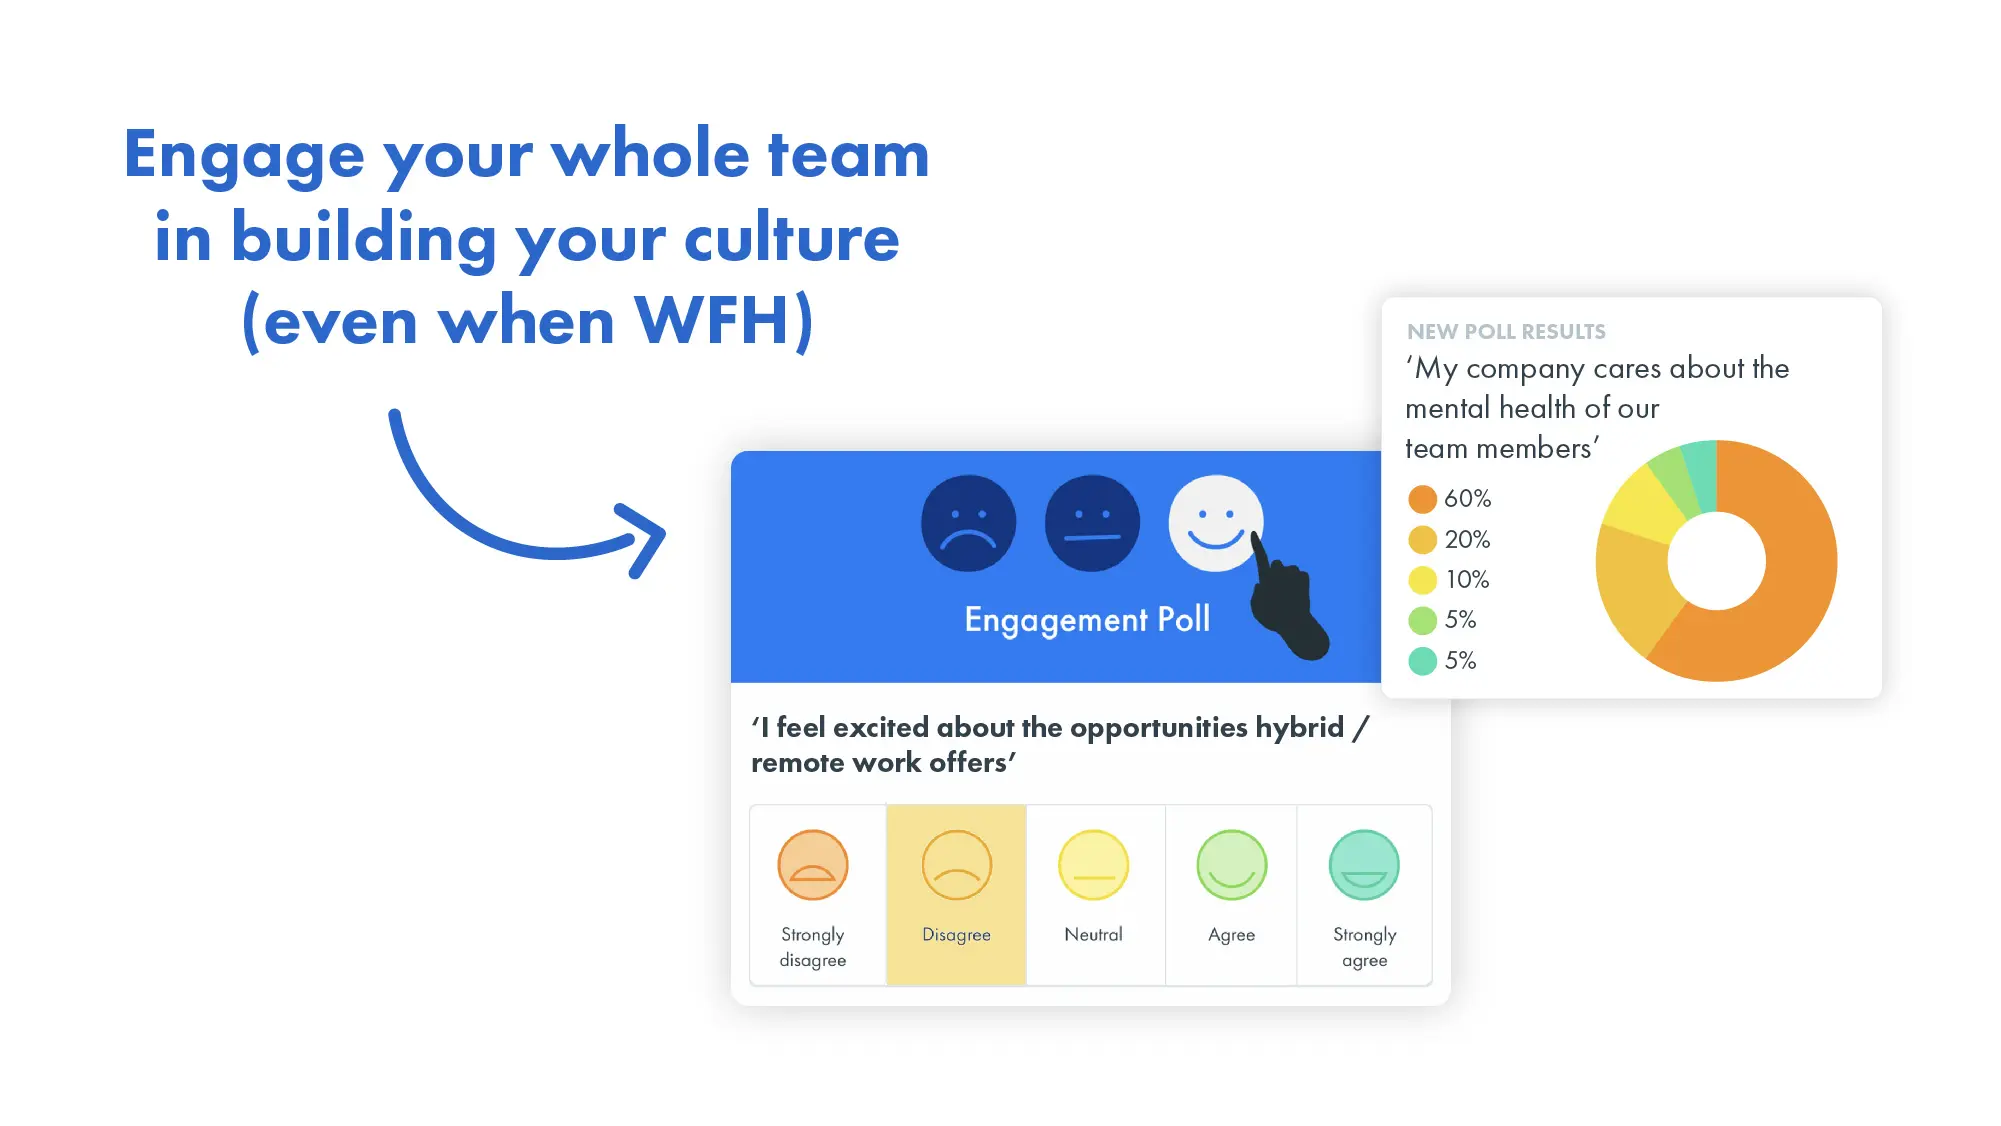 Engage your team remotely with CharlieHR